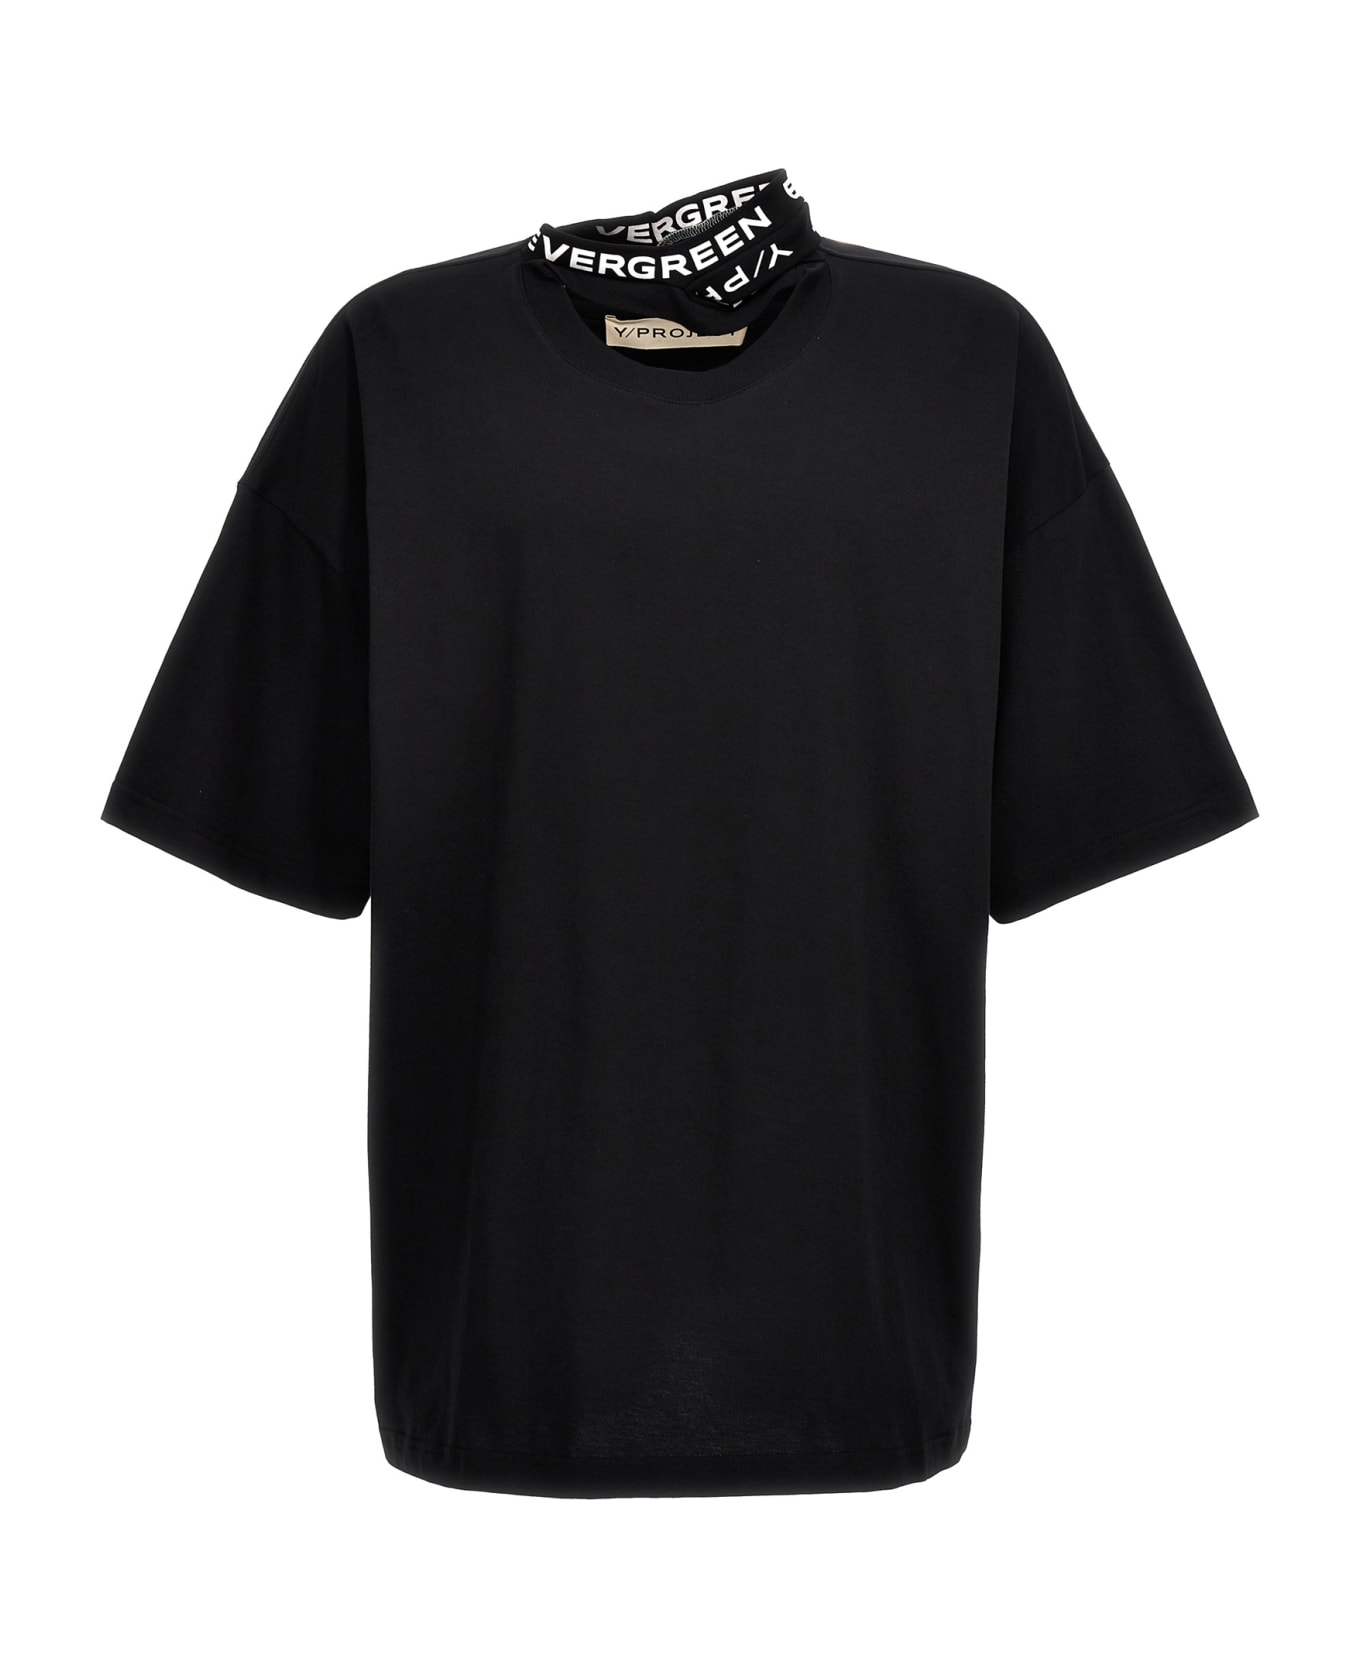 Y/Project 'evergreen' T-shirt - Black   Tシャツ